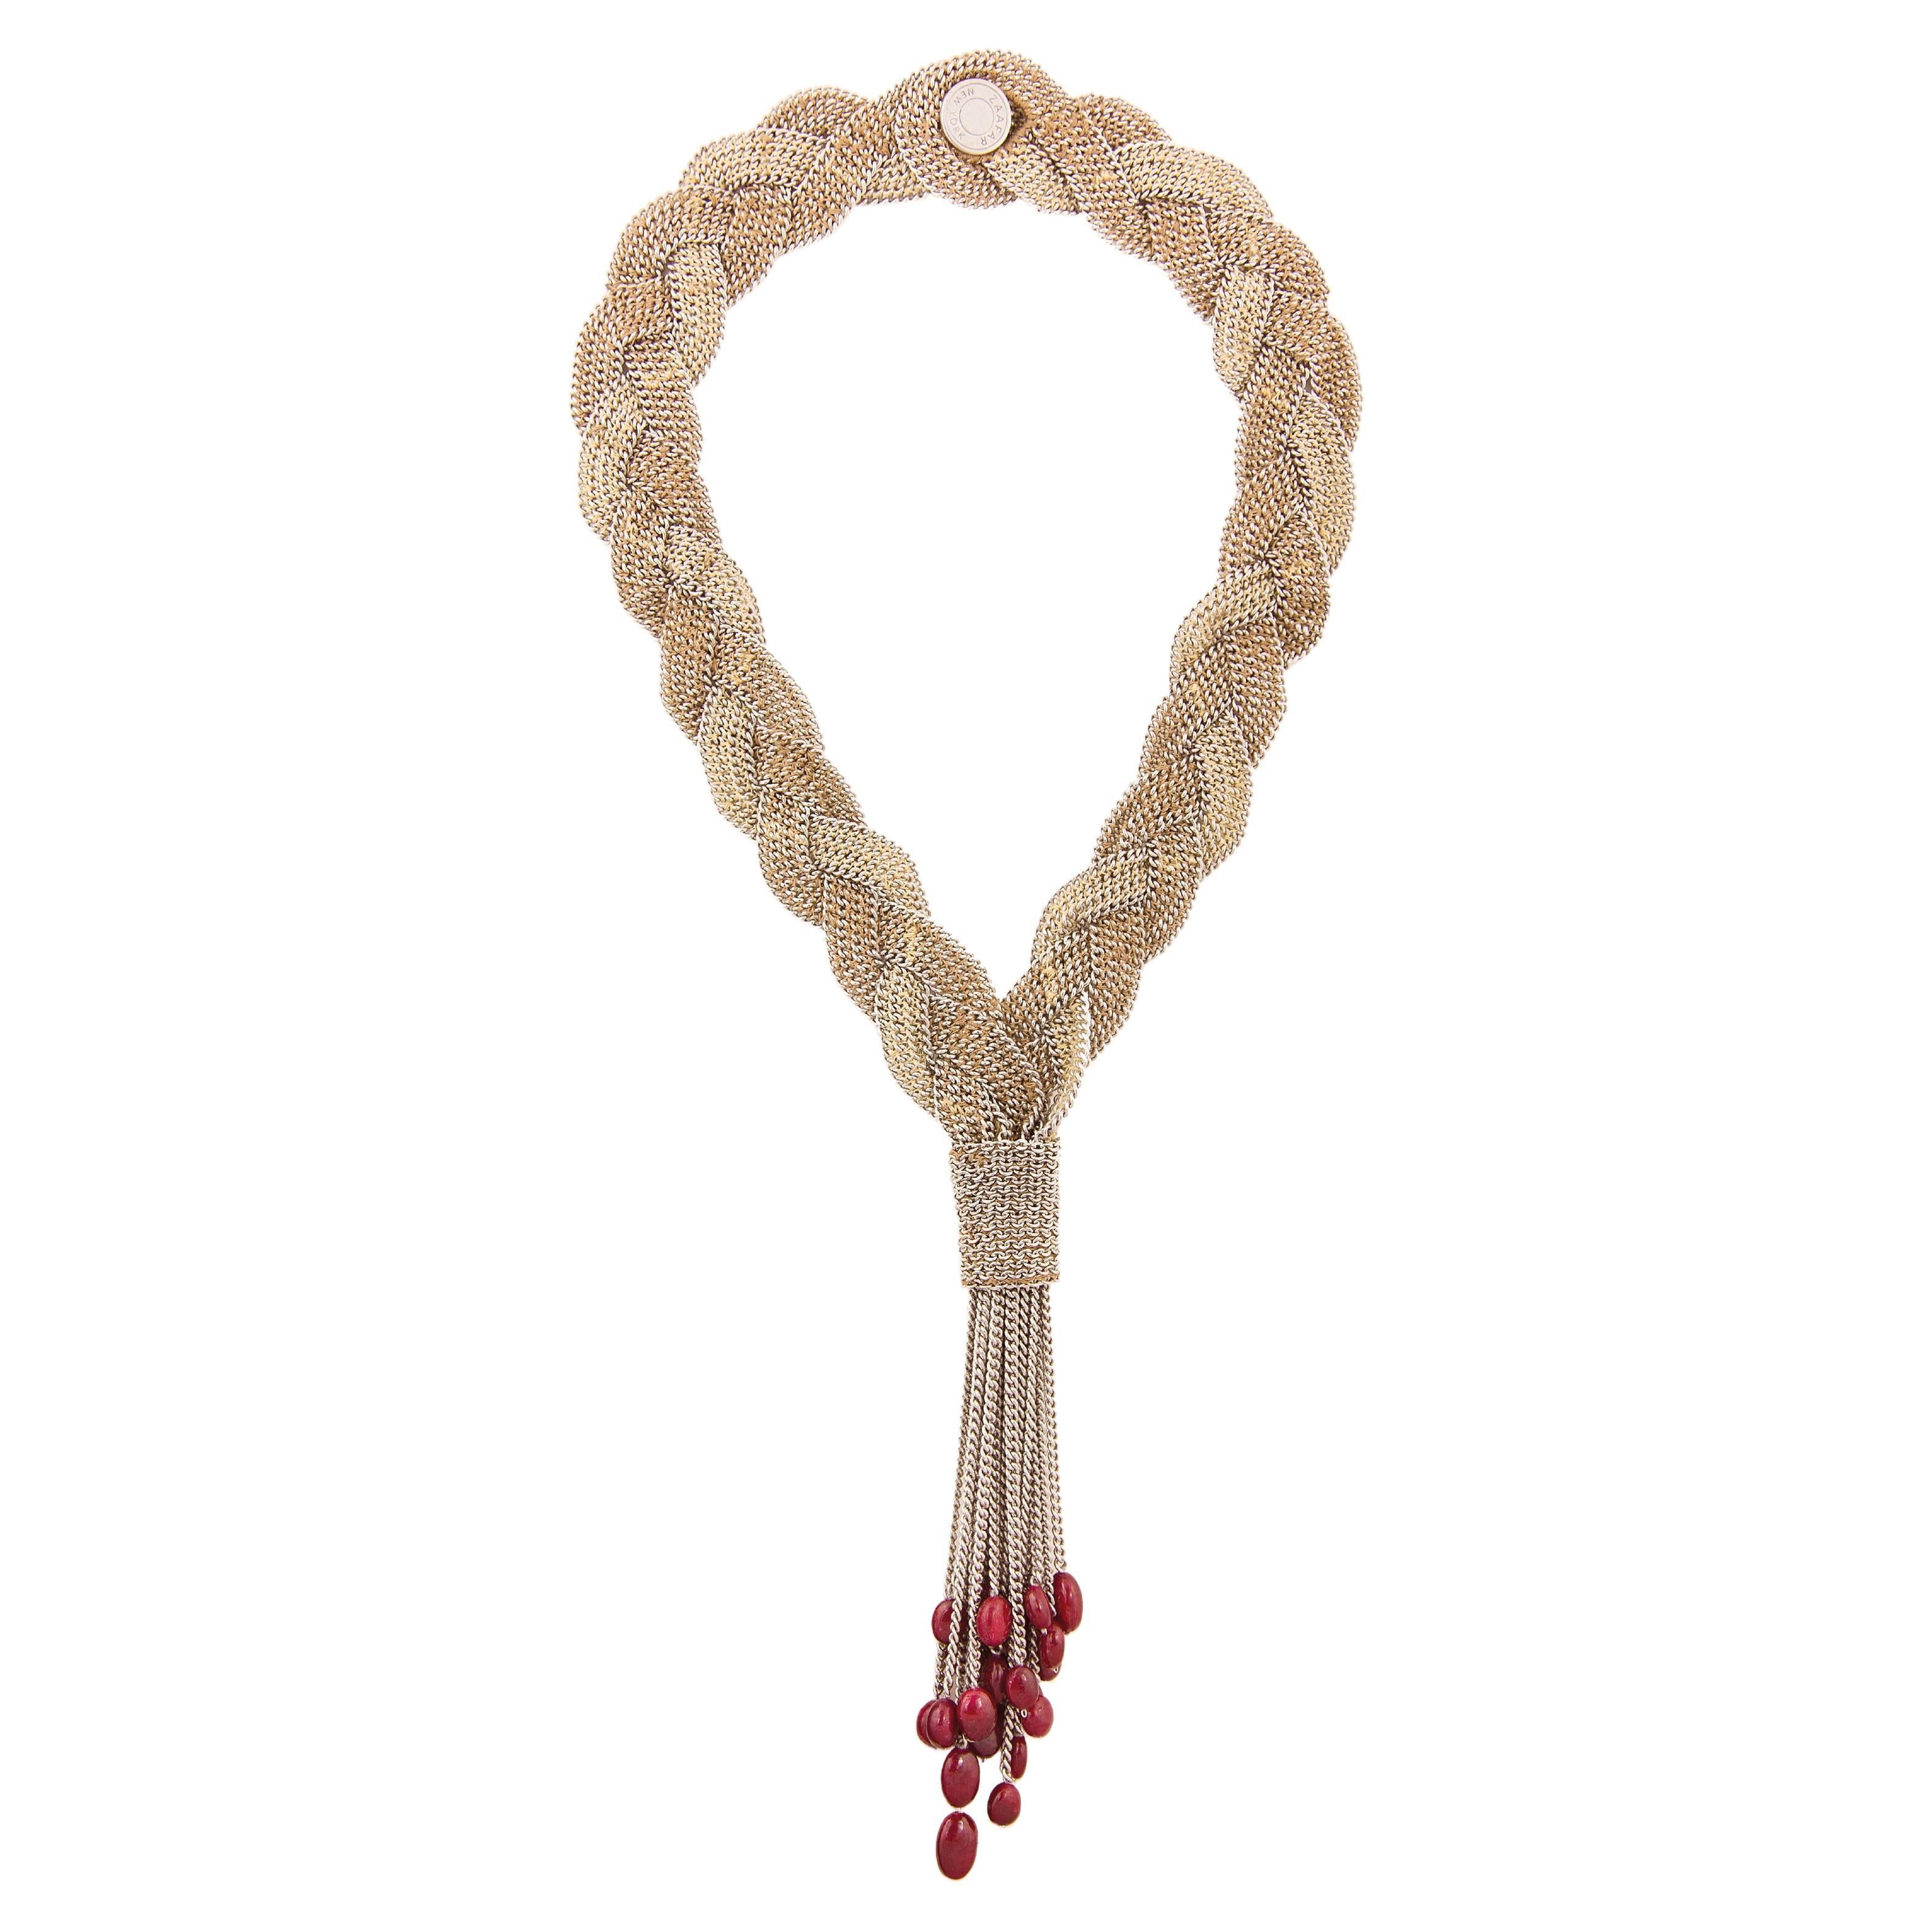 The Braid Necklace- Hand-sewn with Ruby For Sale